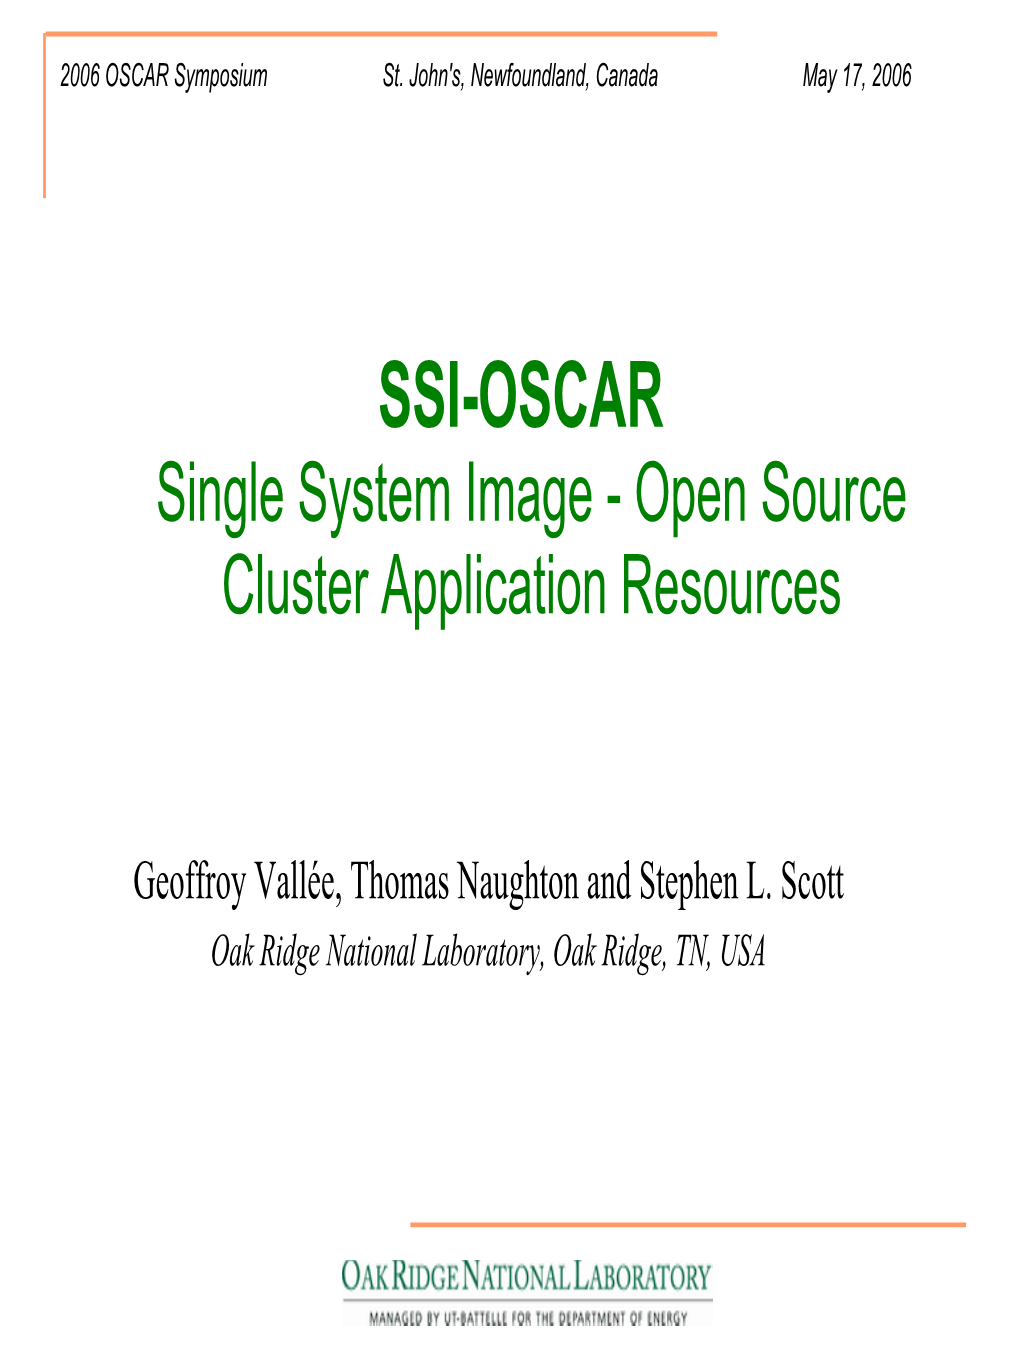 SSI-OSCAR Single System Image - Open Source Cluster Application Resources